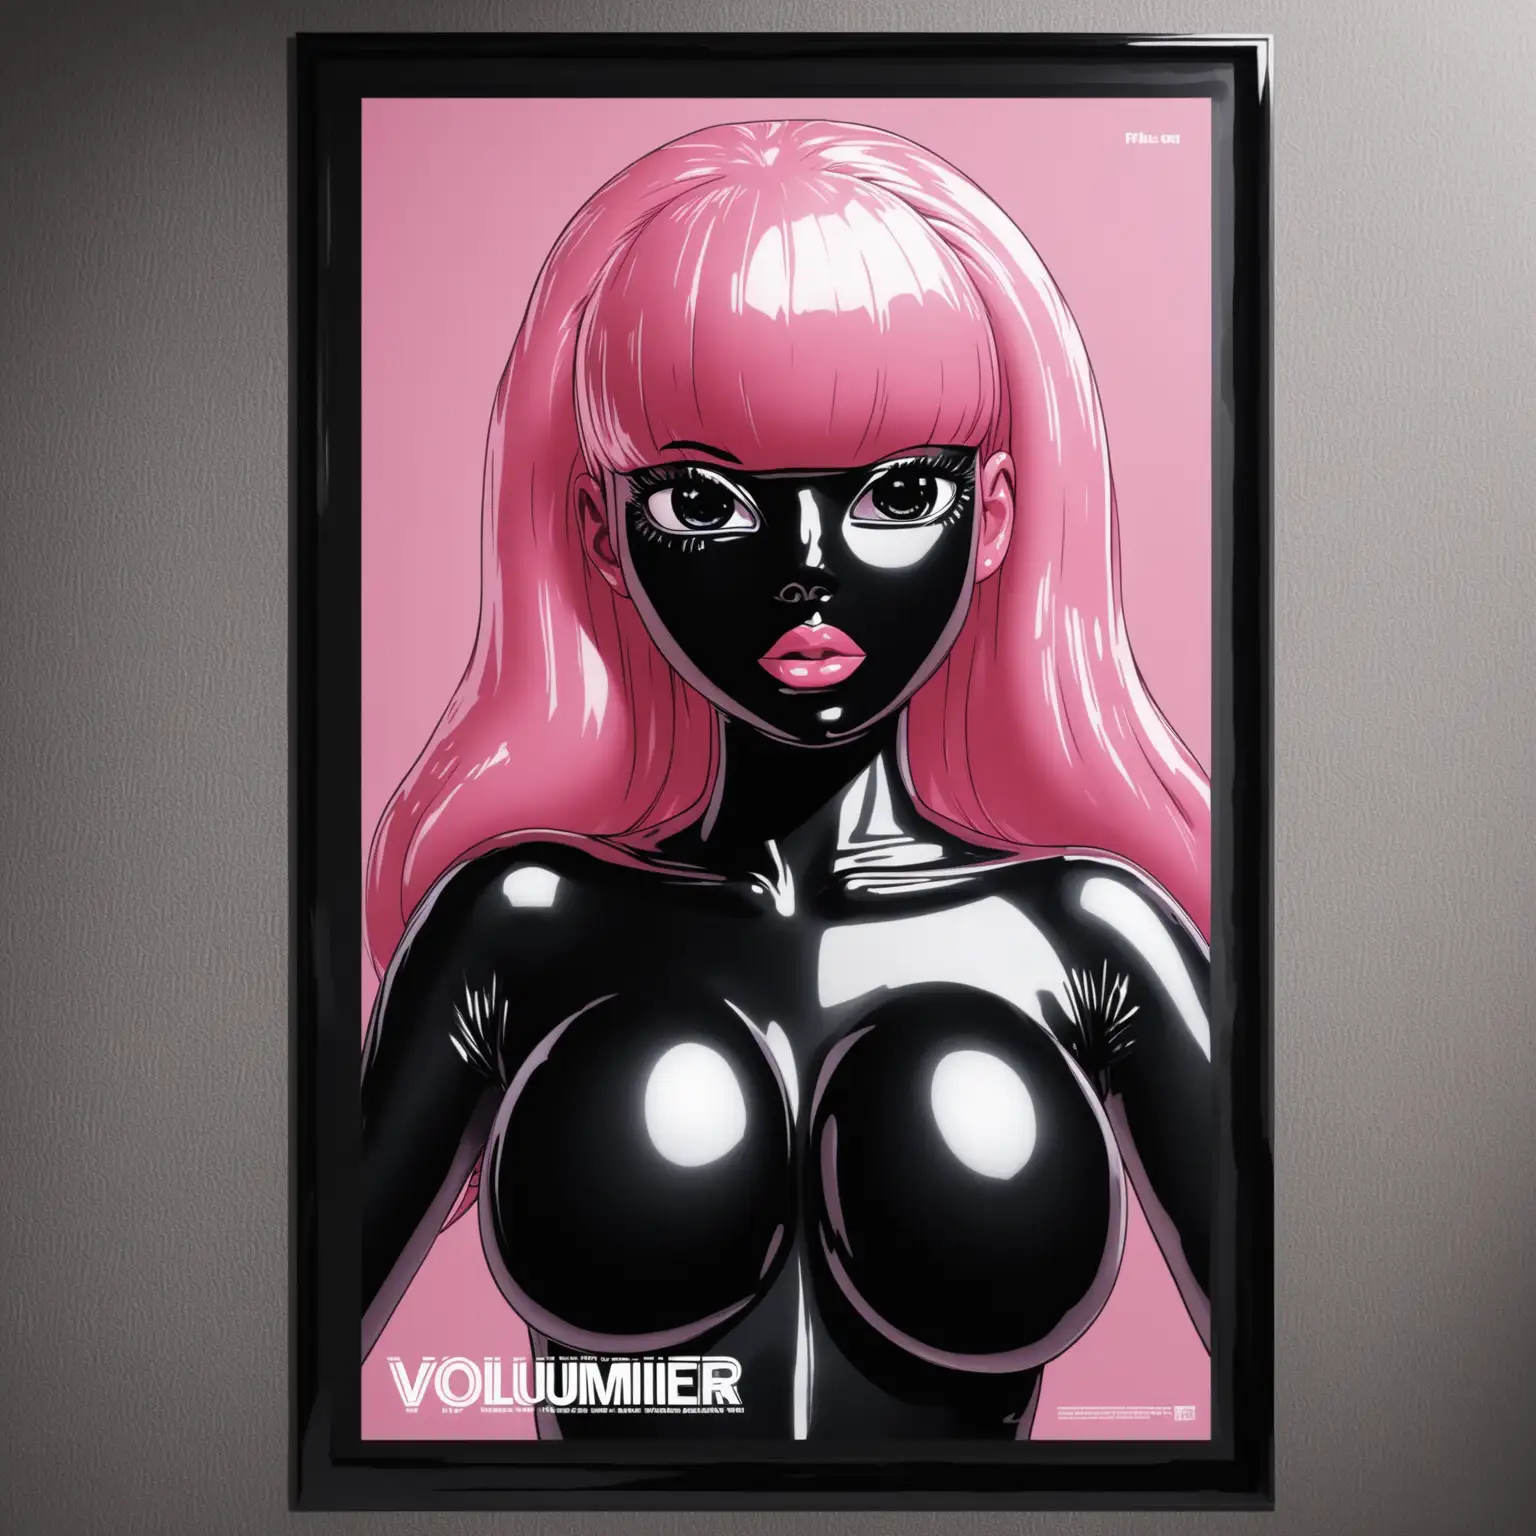 Latex-Girl-Poster-with-Pink-Rubber-Hair-and-Voluminous-Breast